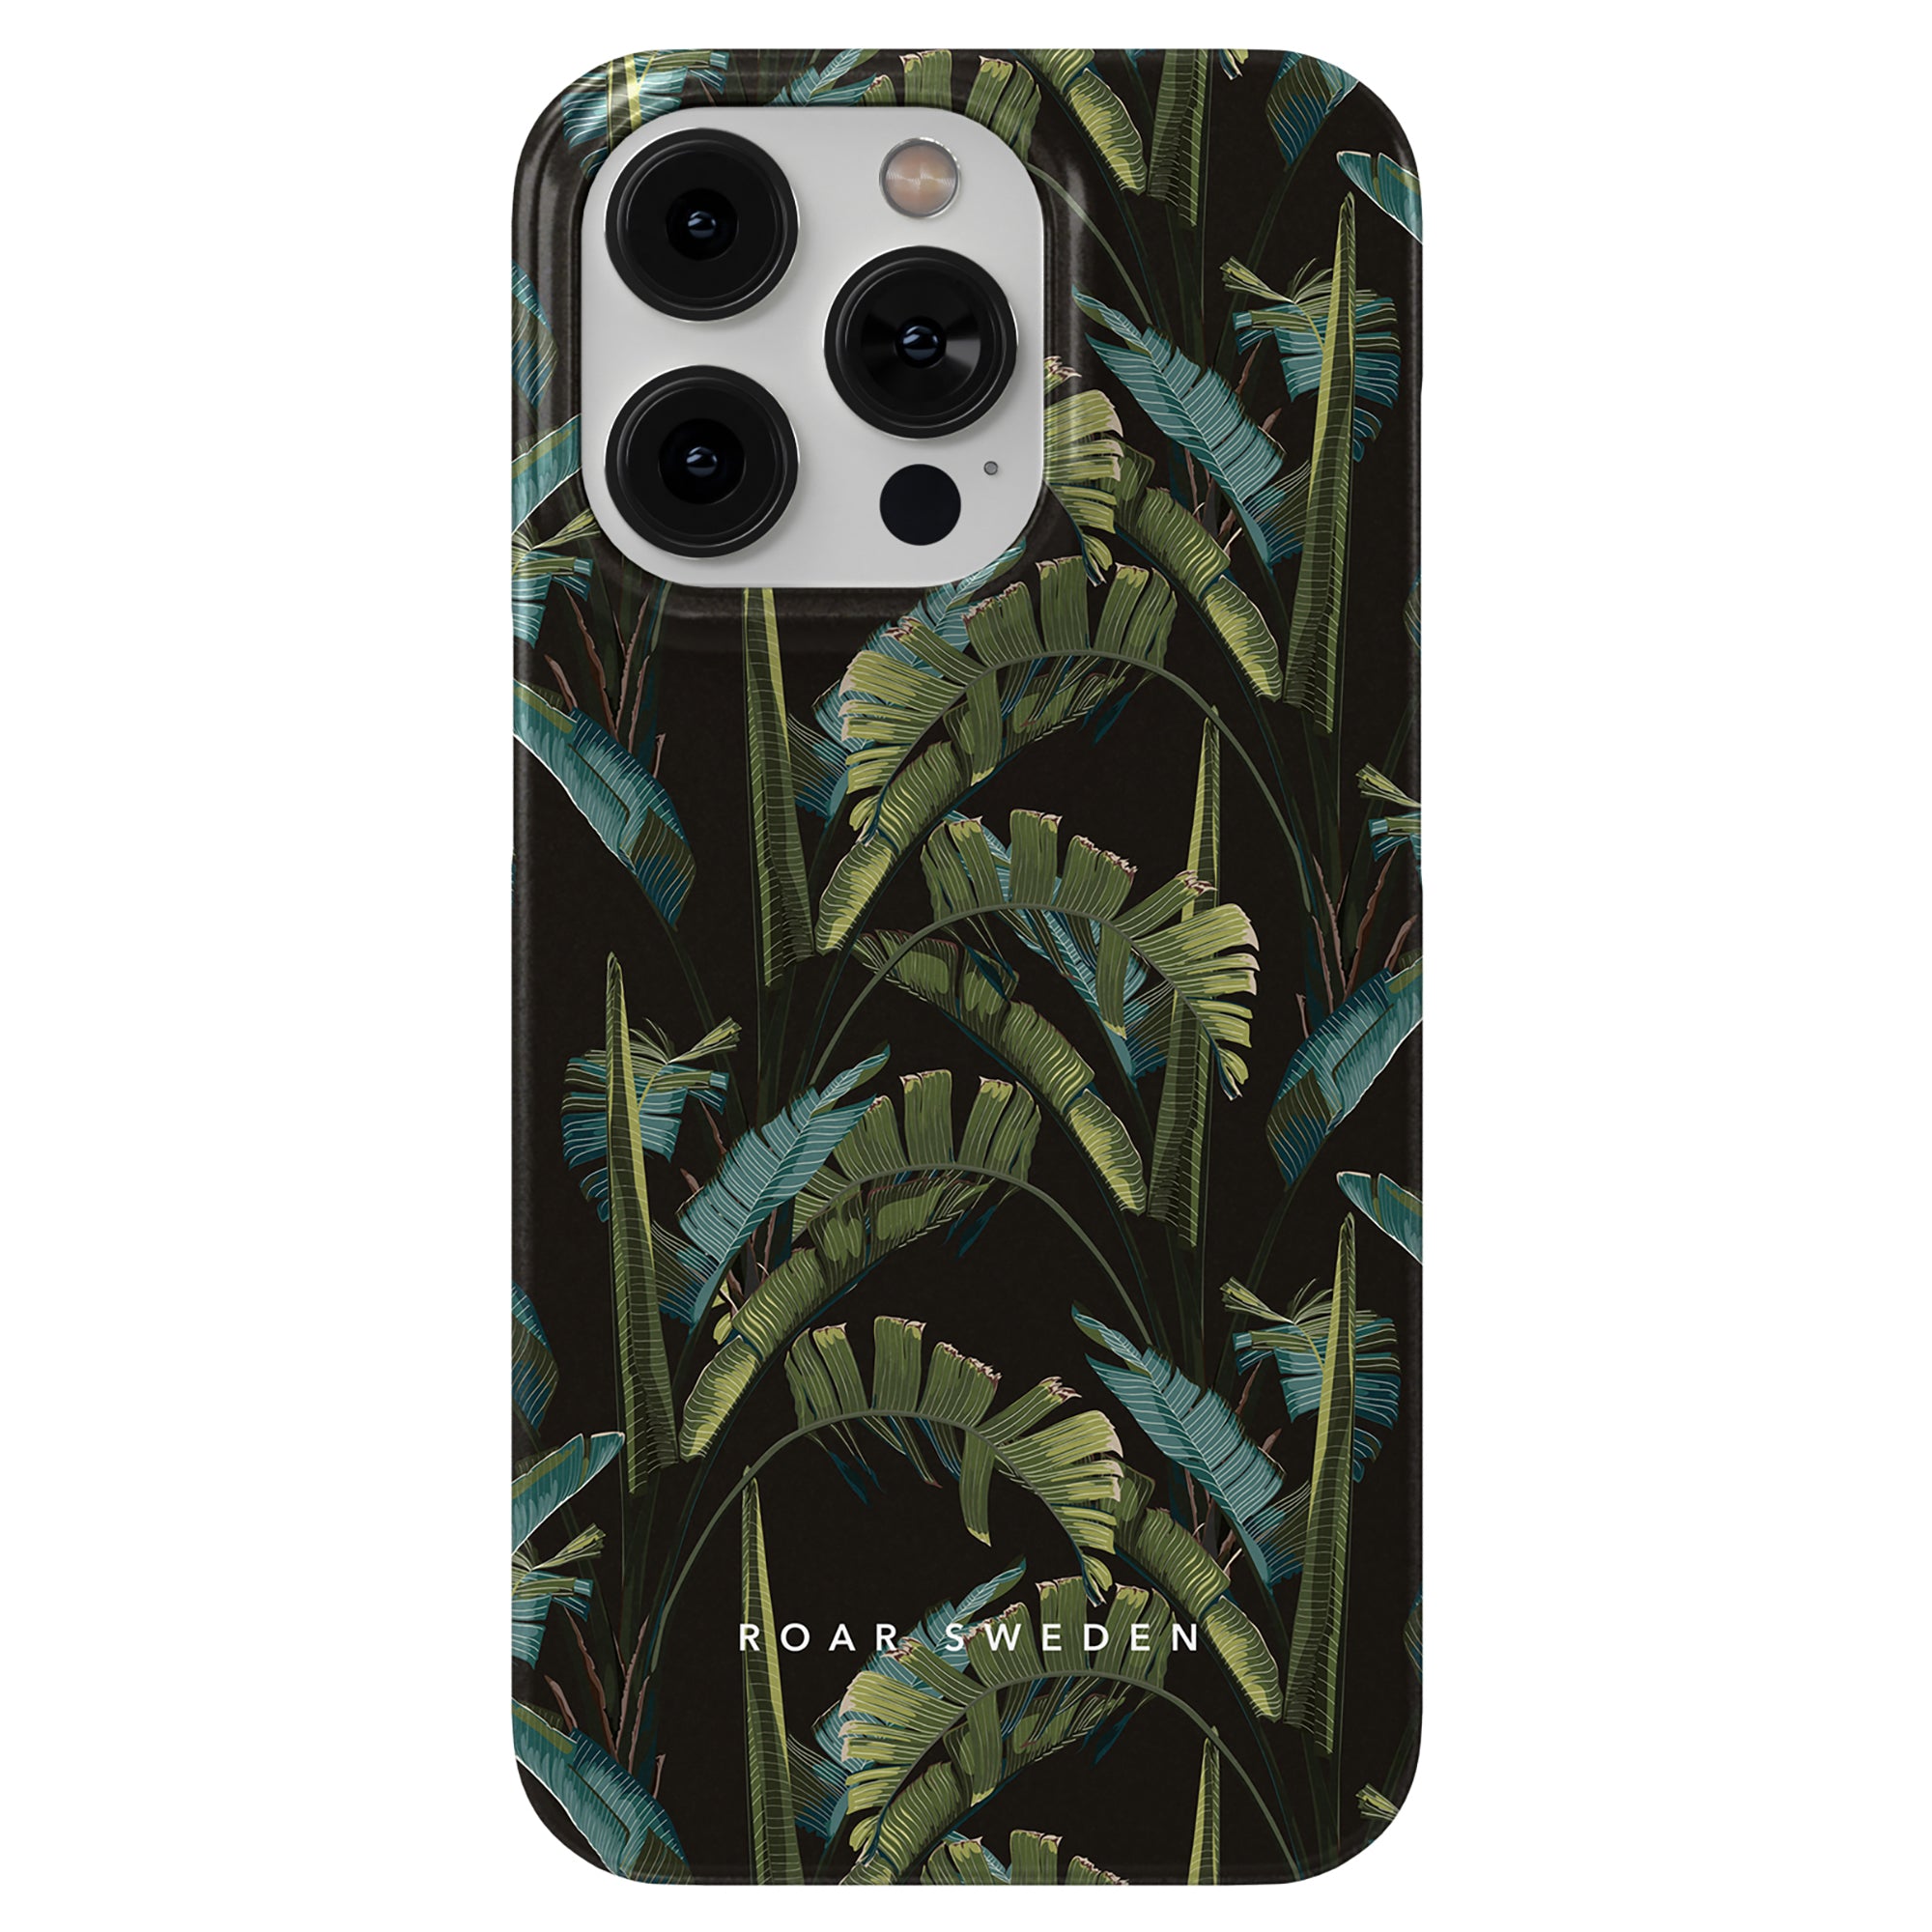 Tropical leaf pattern slim case smartphone case with camera cutouts from our Mystic Jungle - Slim case collection.